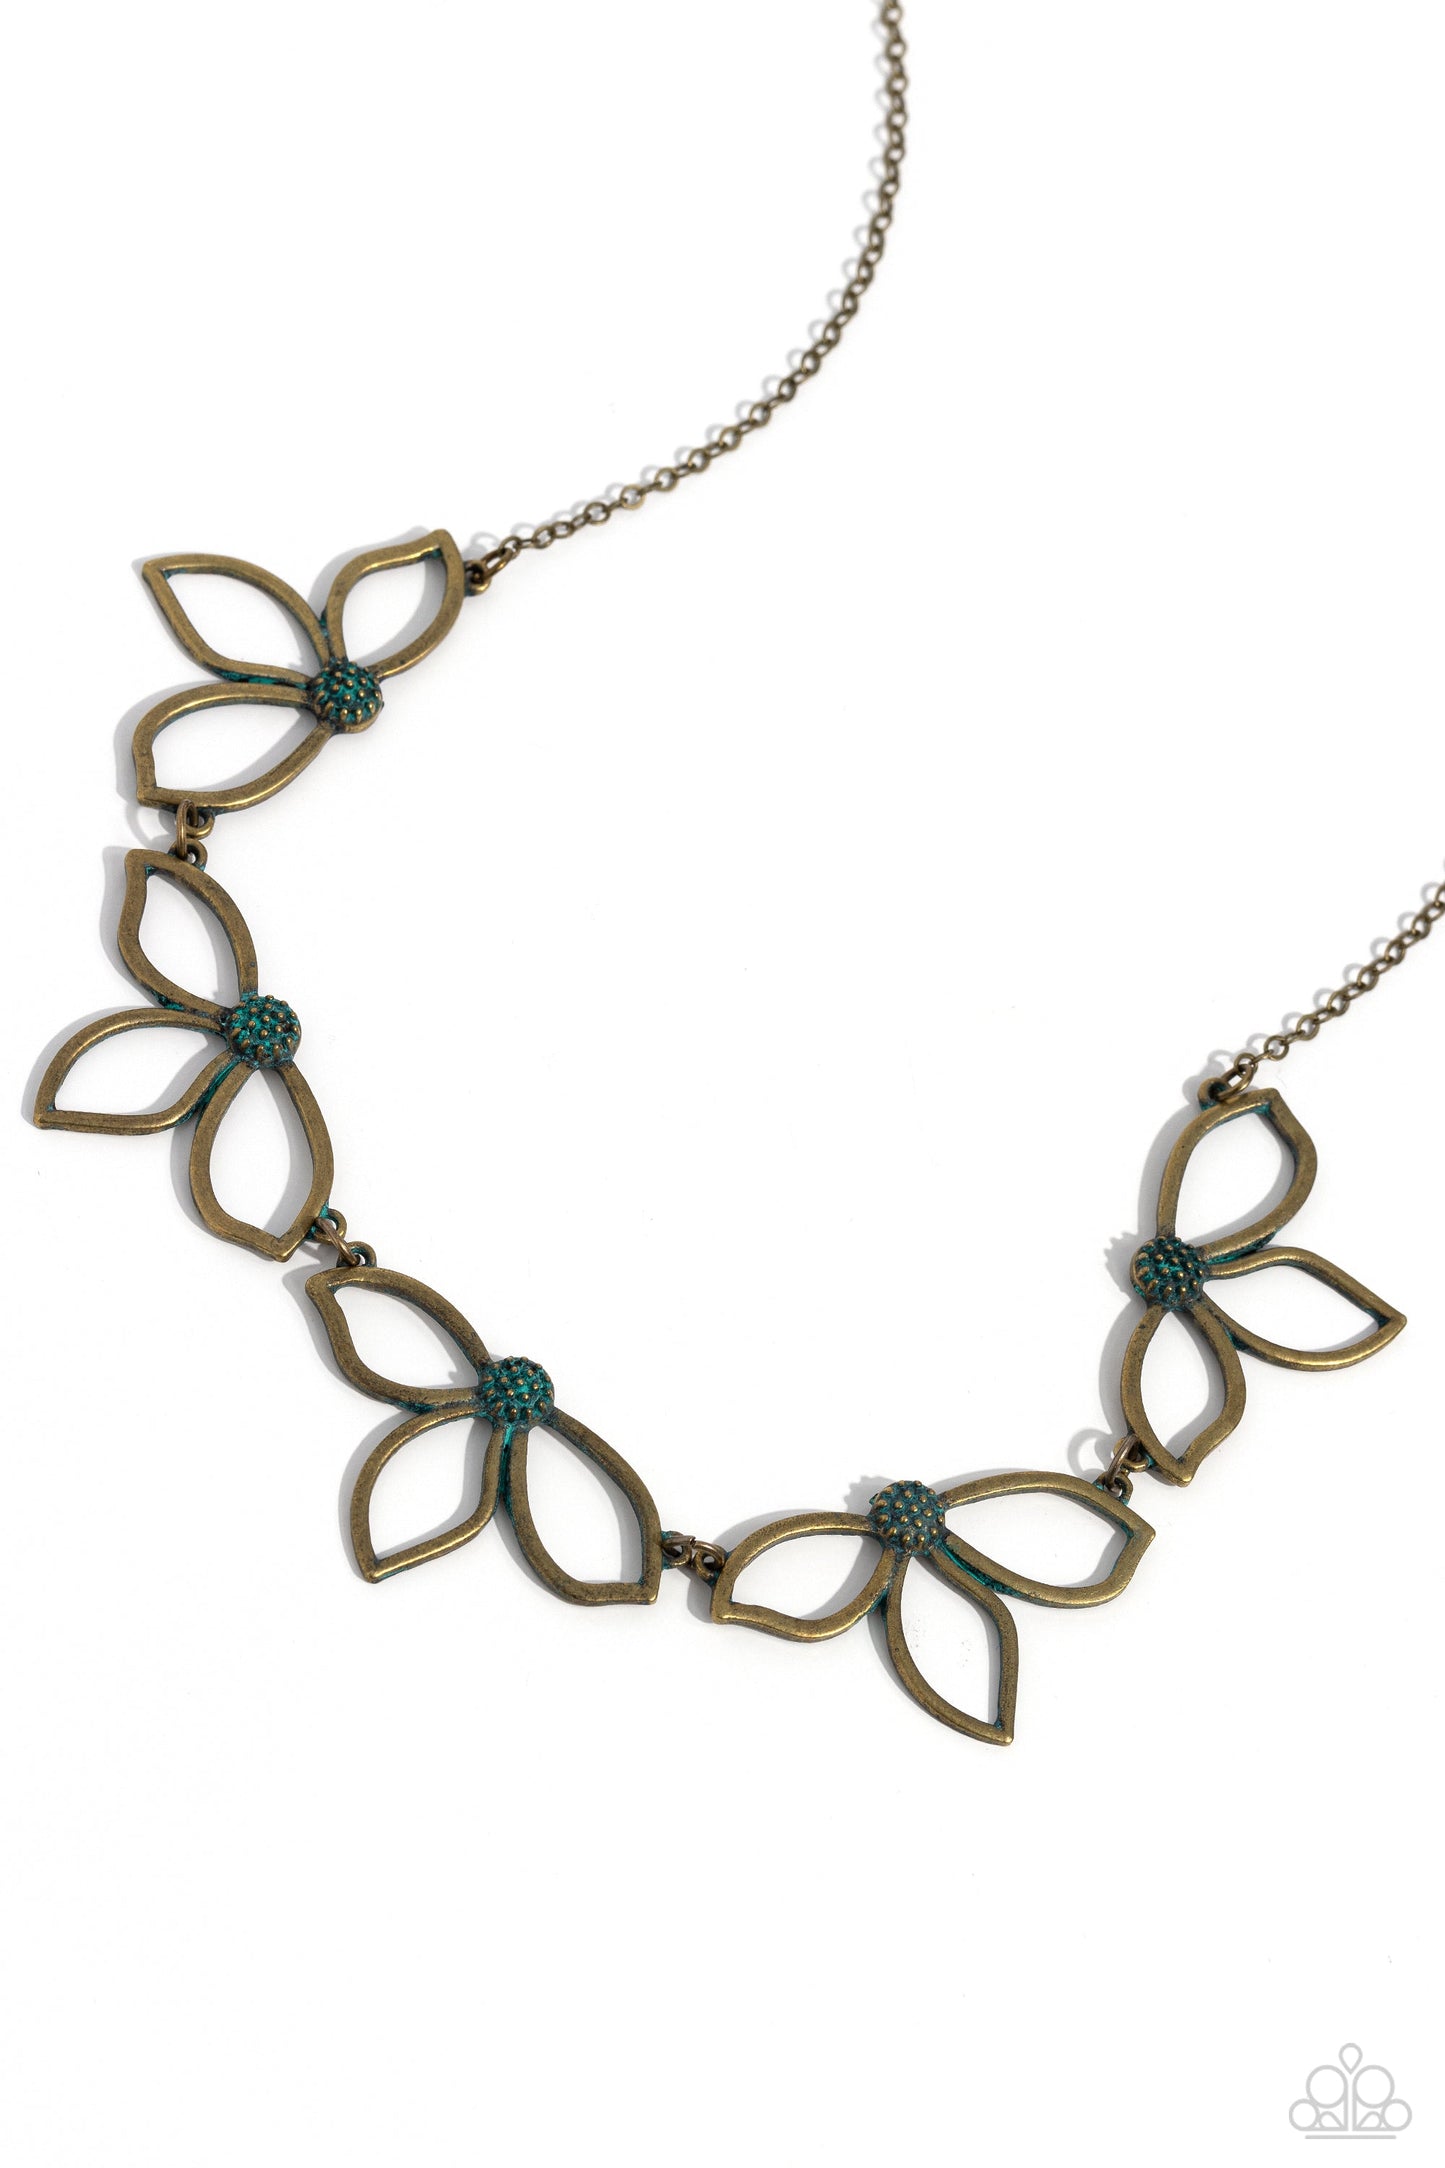 Petal Pageantry - Brass Necklace - Paparazzi Accessories - Featuring patina-brushed centers, dainty brass petals delicately link together and fan out below the collar for a whimsical fashion.